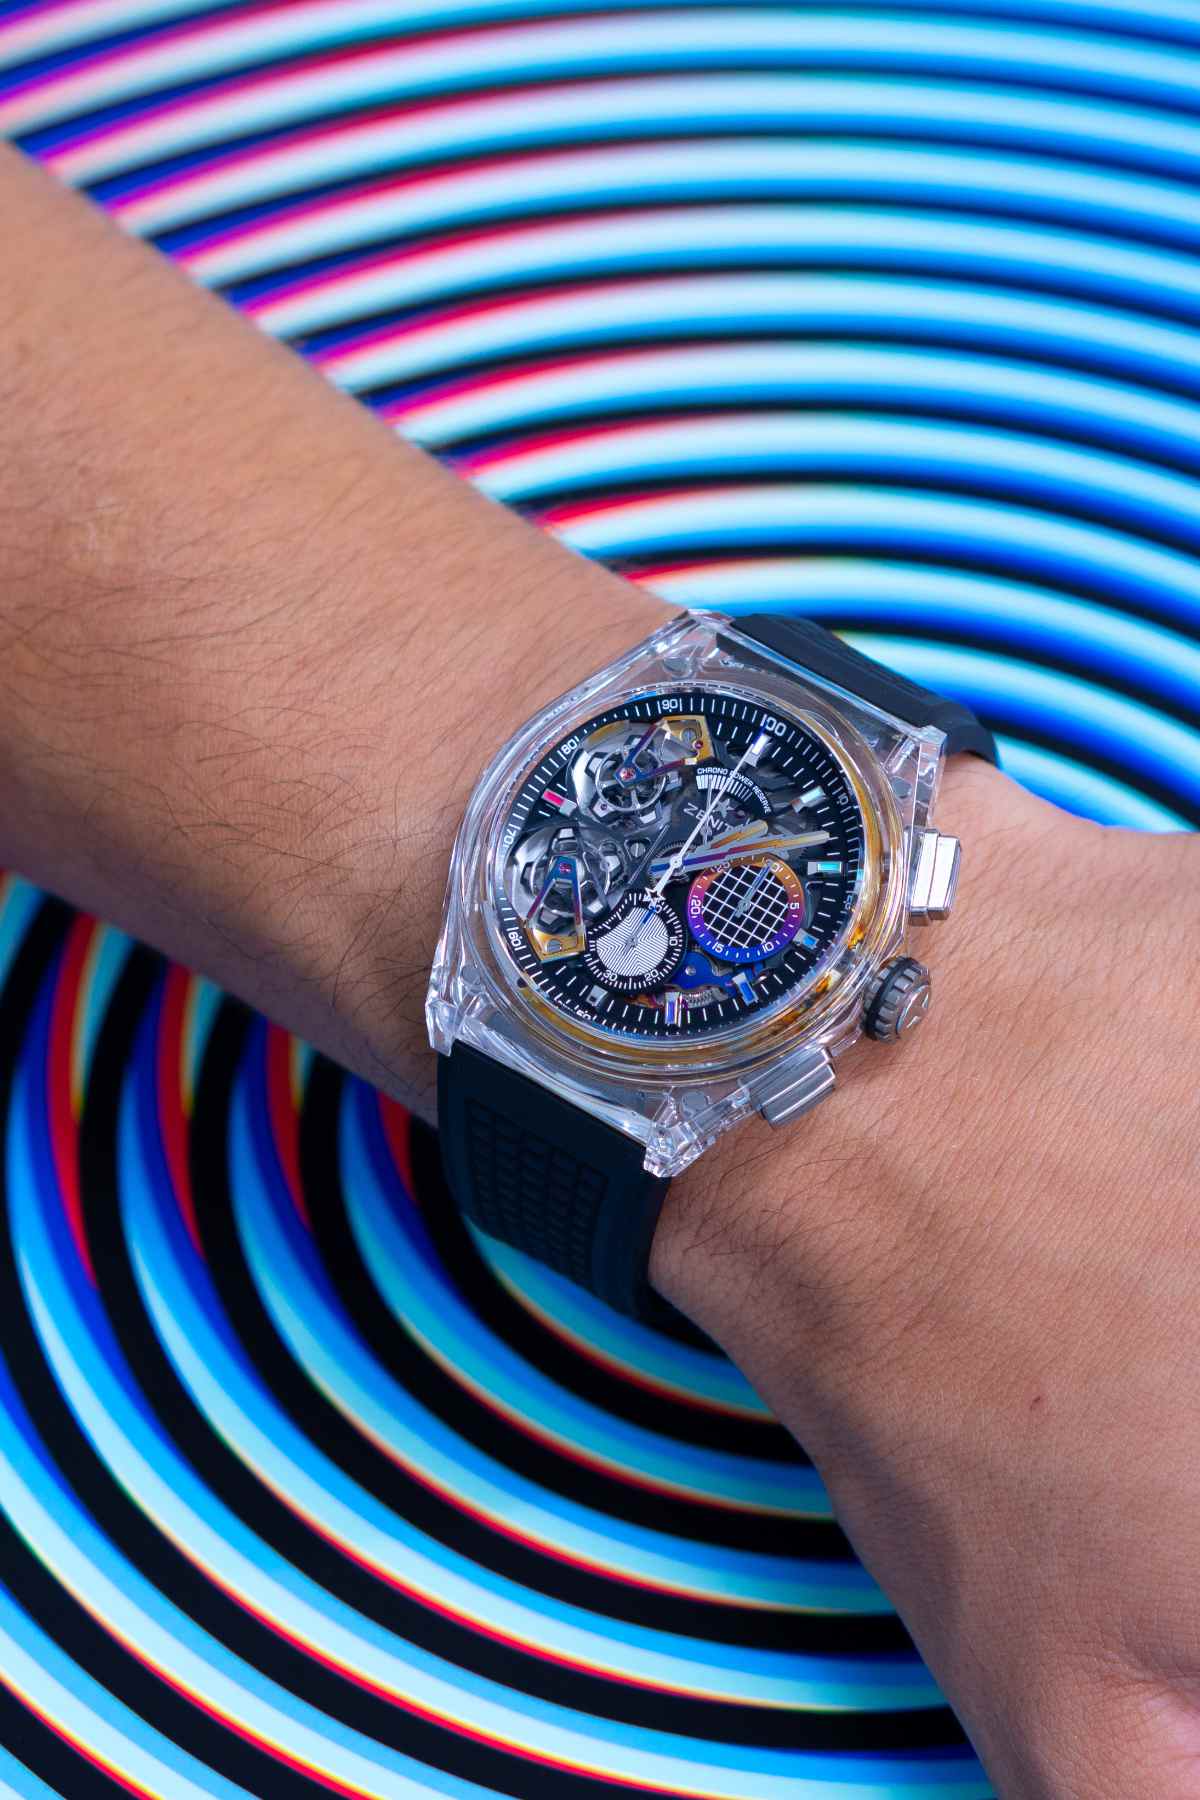 An Astounding Result For The Zenith X Felipe Pantone DEFY 21 Double Tourbillon At Only Watch 2021